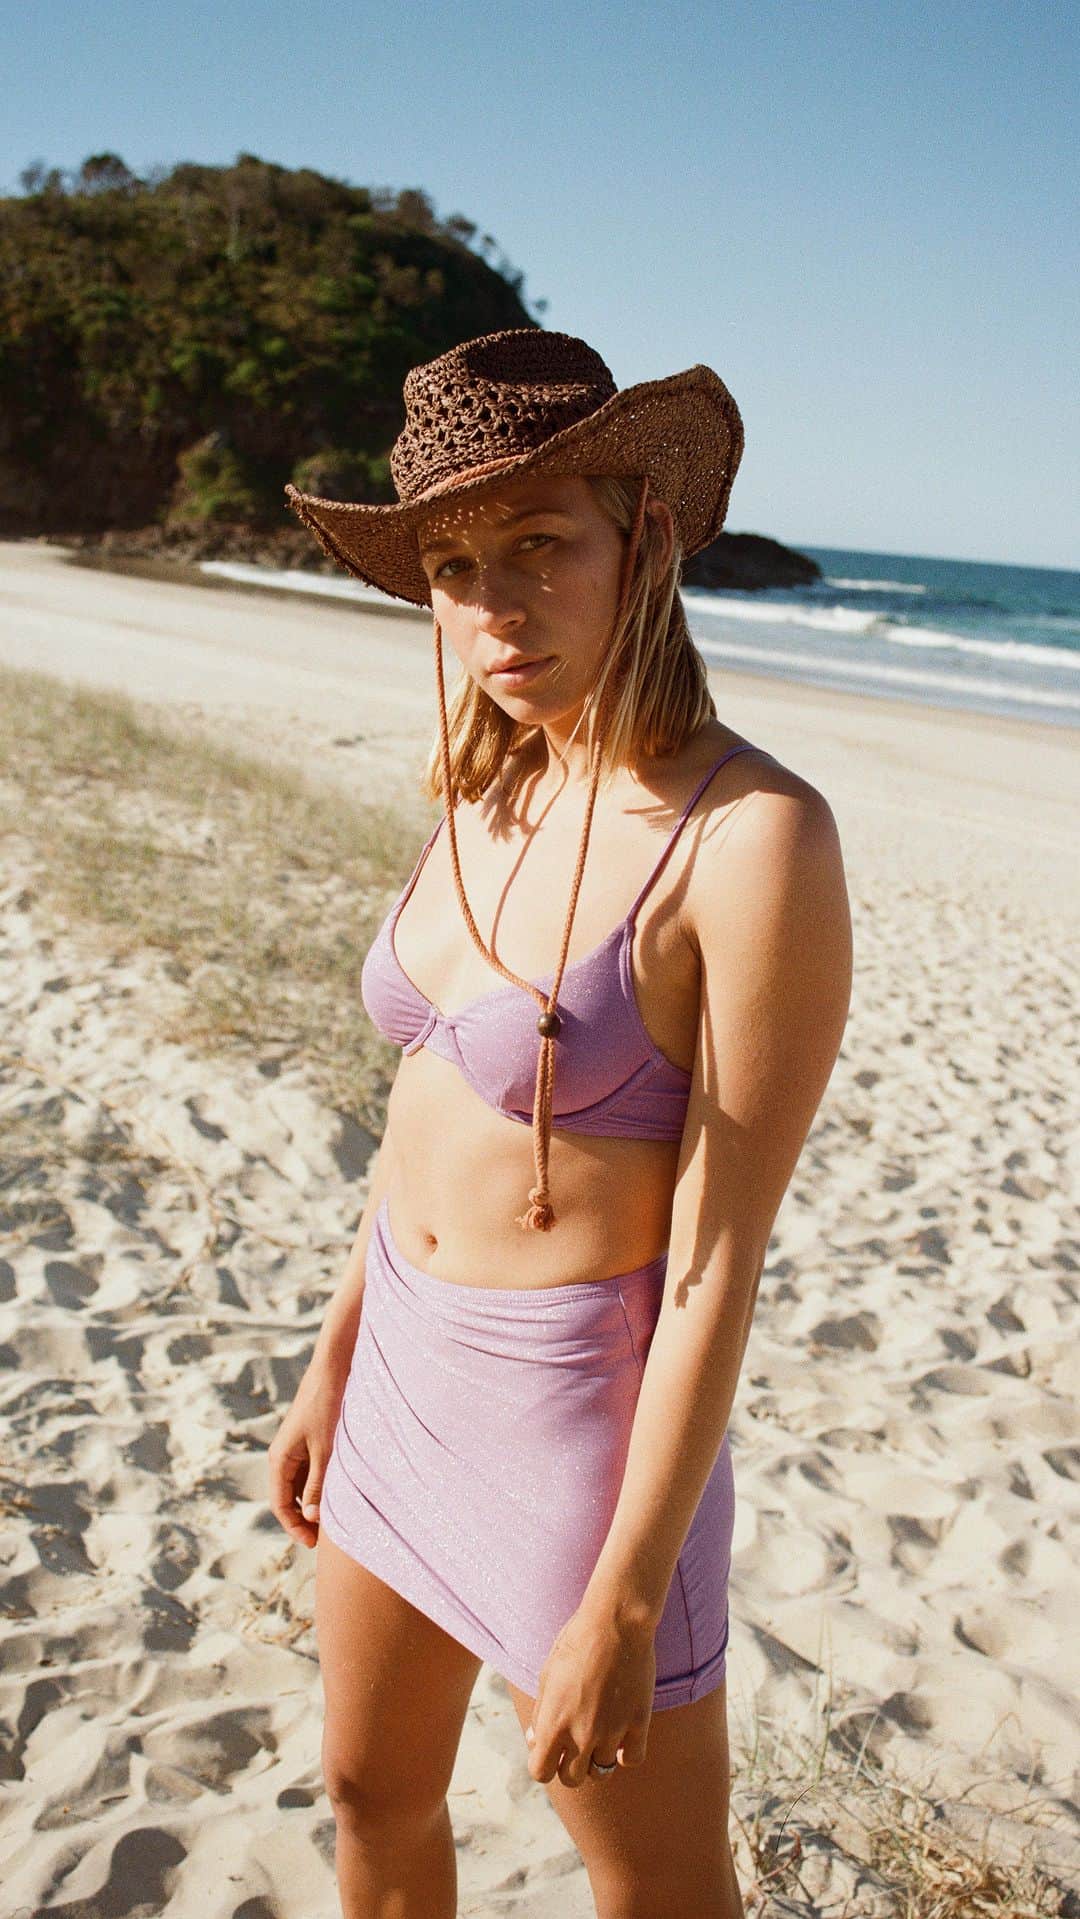 BILLABONG WOMENSのインスタグラム：「The magical world of @jaleesavincent✨   Presenting ‘Stardust’, a short film capturing Jaleesa’s clairvoyant spirit on the forgotten Australian mid-East coast shores.   Explore her home breaks, witness her deep love for nature, and feel the pulse of her innate passion for music and movement.   Directed by @jaleesavincent & @luka.r_films  Edited and Filmed by @luka.r_fil  Additional Filmers @danscotttt, @berenhall, @grigs_,@andrewkaineder.  Produced by @billabong_womens_australia  Music by @jaleesavincent」